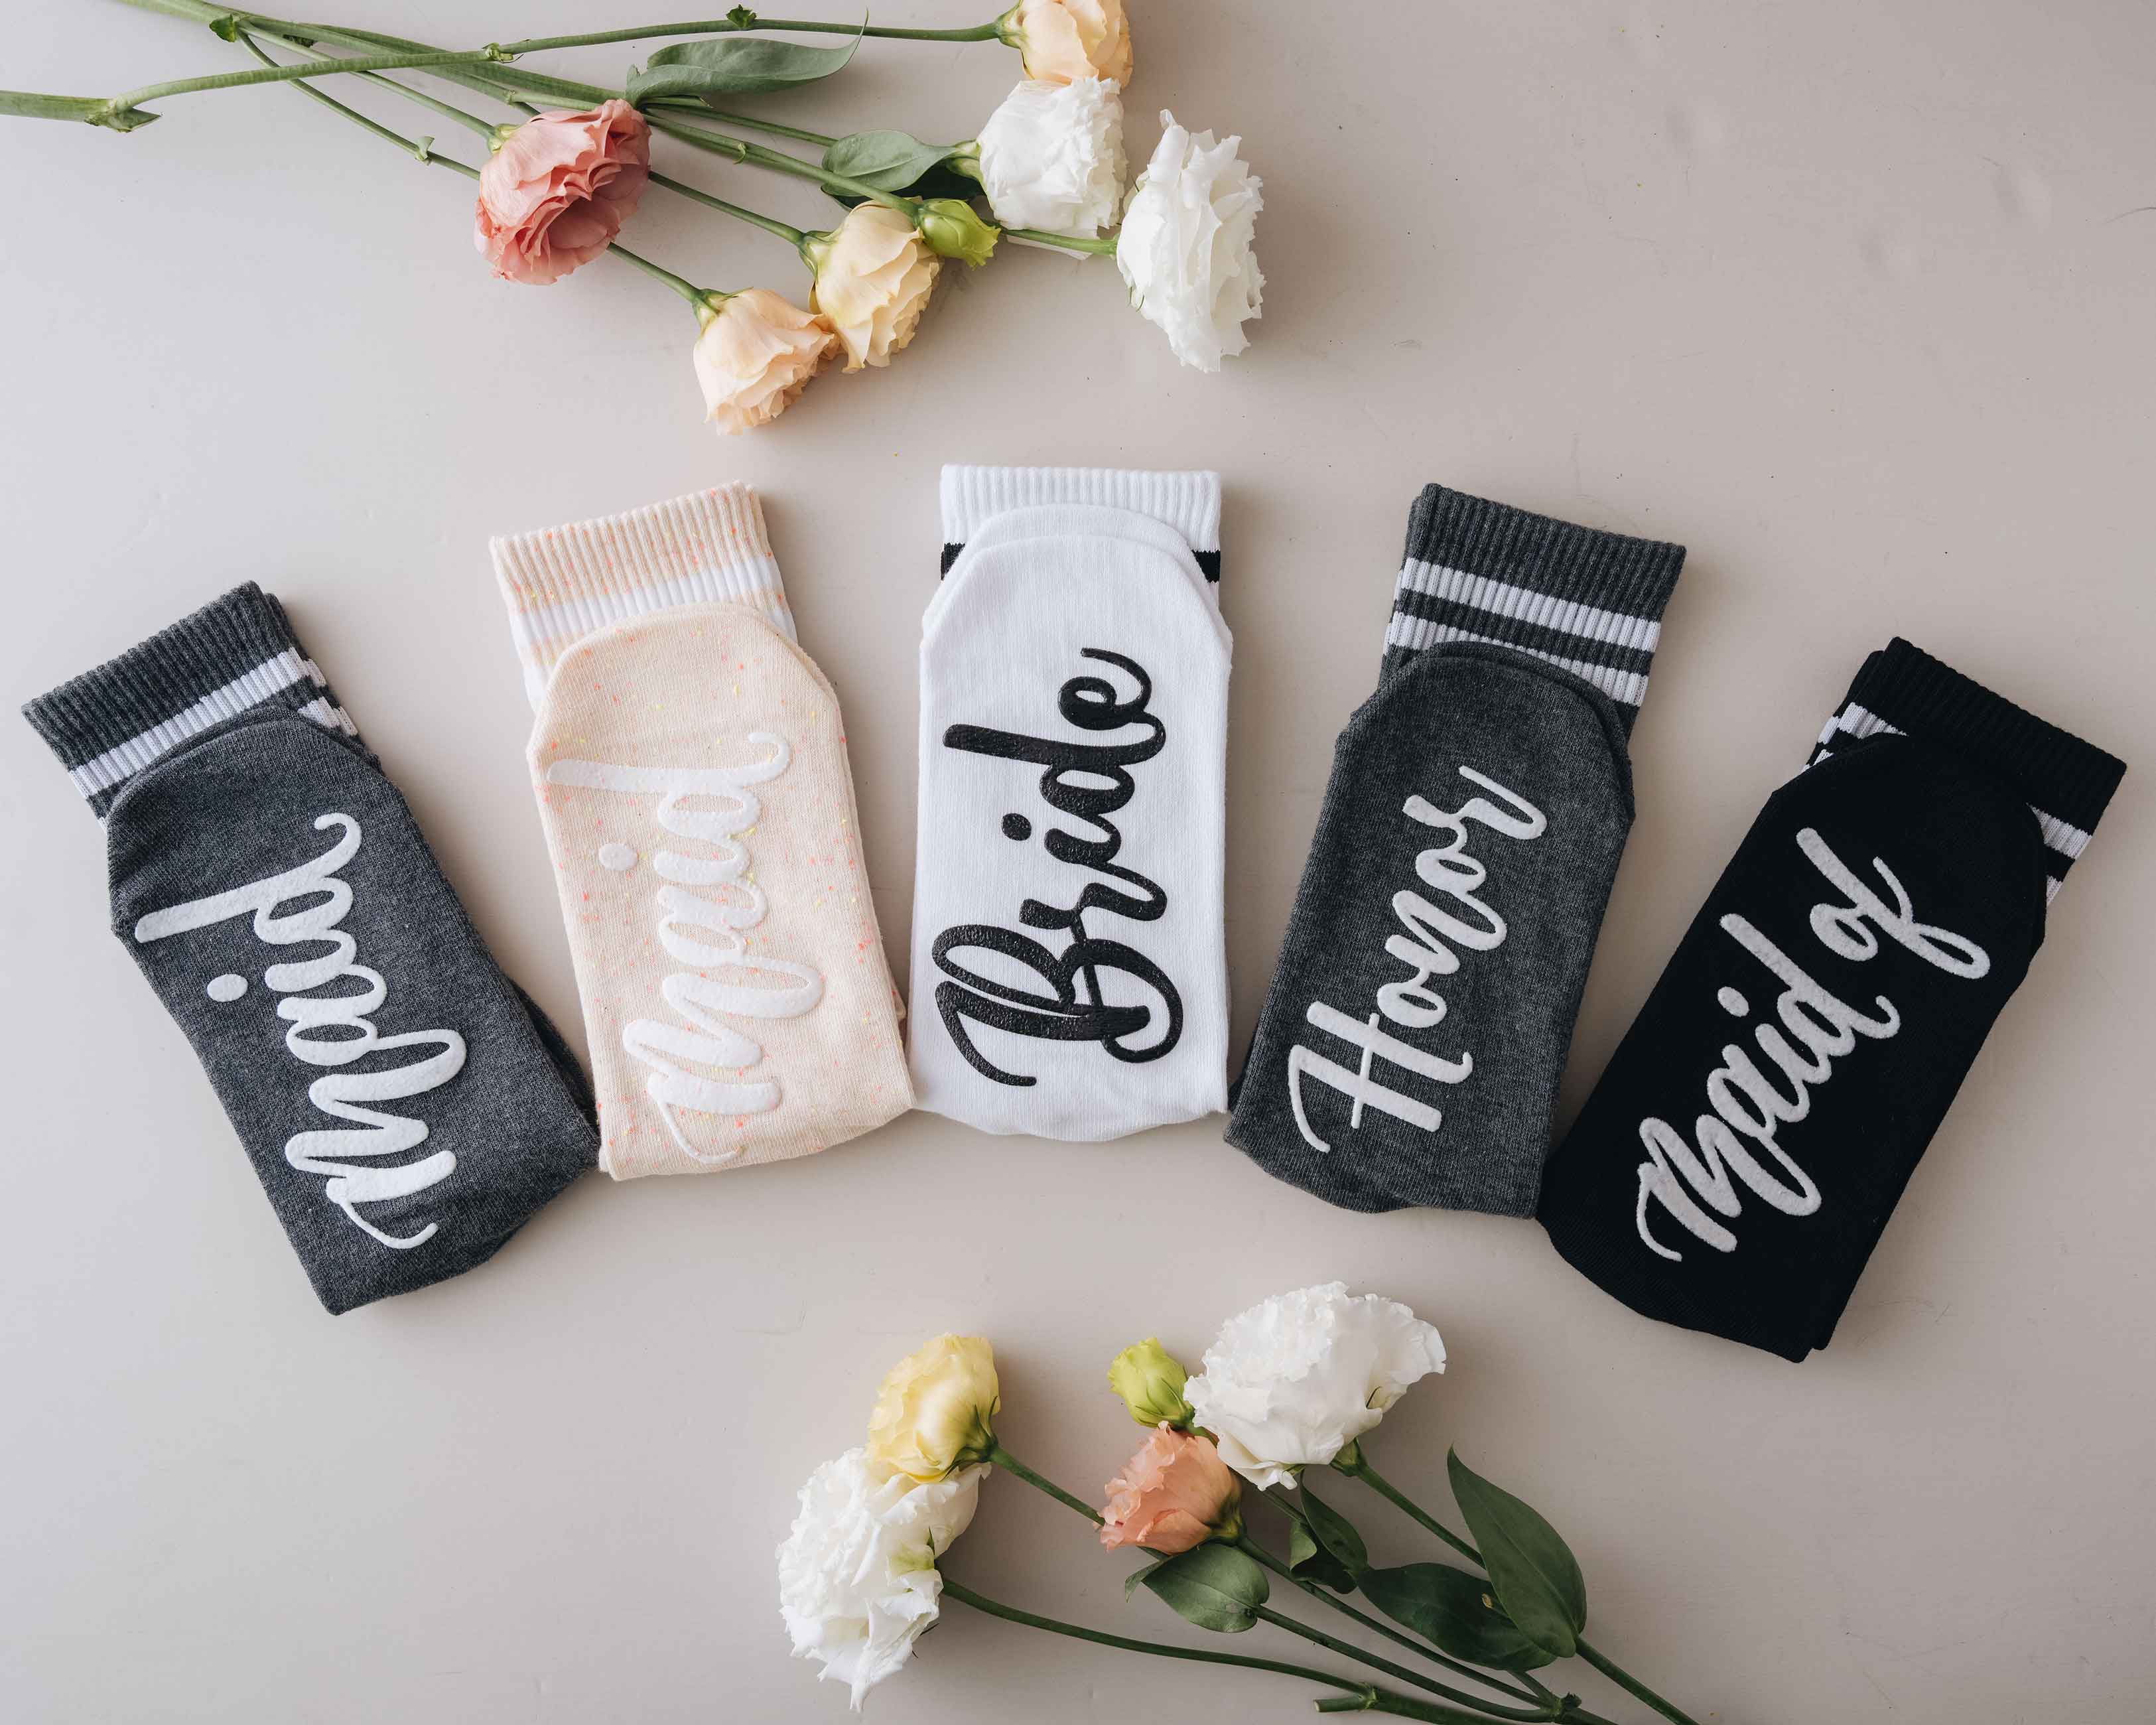 Bridesmaid Socks - Bridesmaid Socks for Bachelorette Party provide 4 different sock color and 4 different custom text displayed on the bottom of bridesmaid socks - "The Bride," "Bridesmaid," "Maid of Honor," or "Matron of Honor."